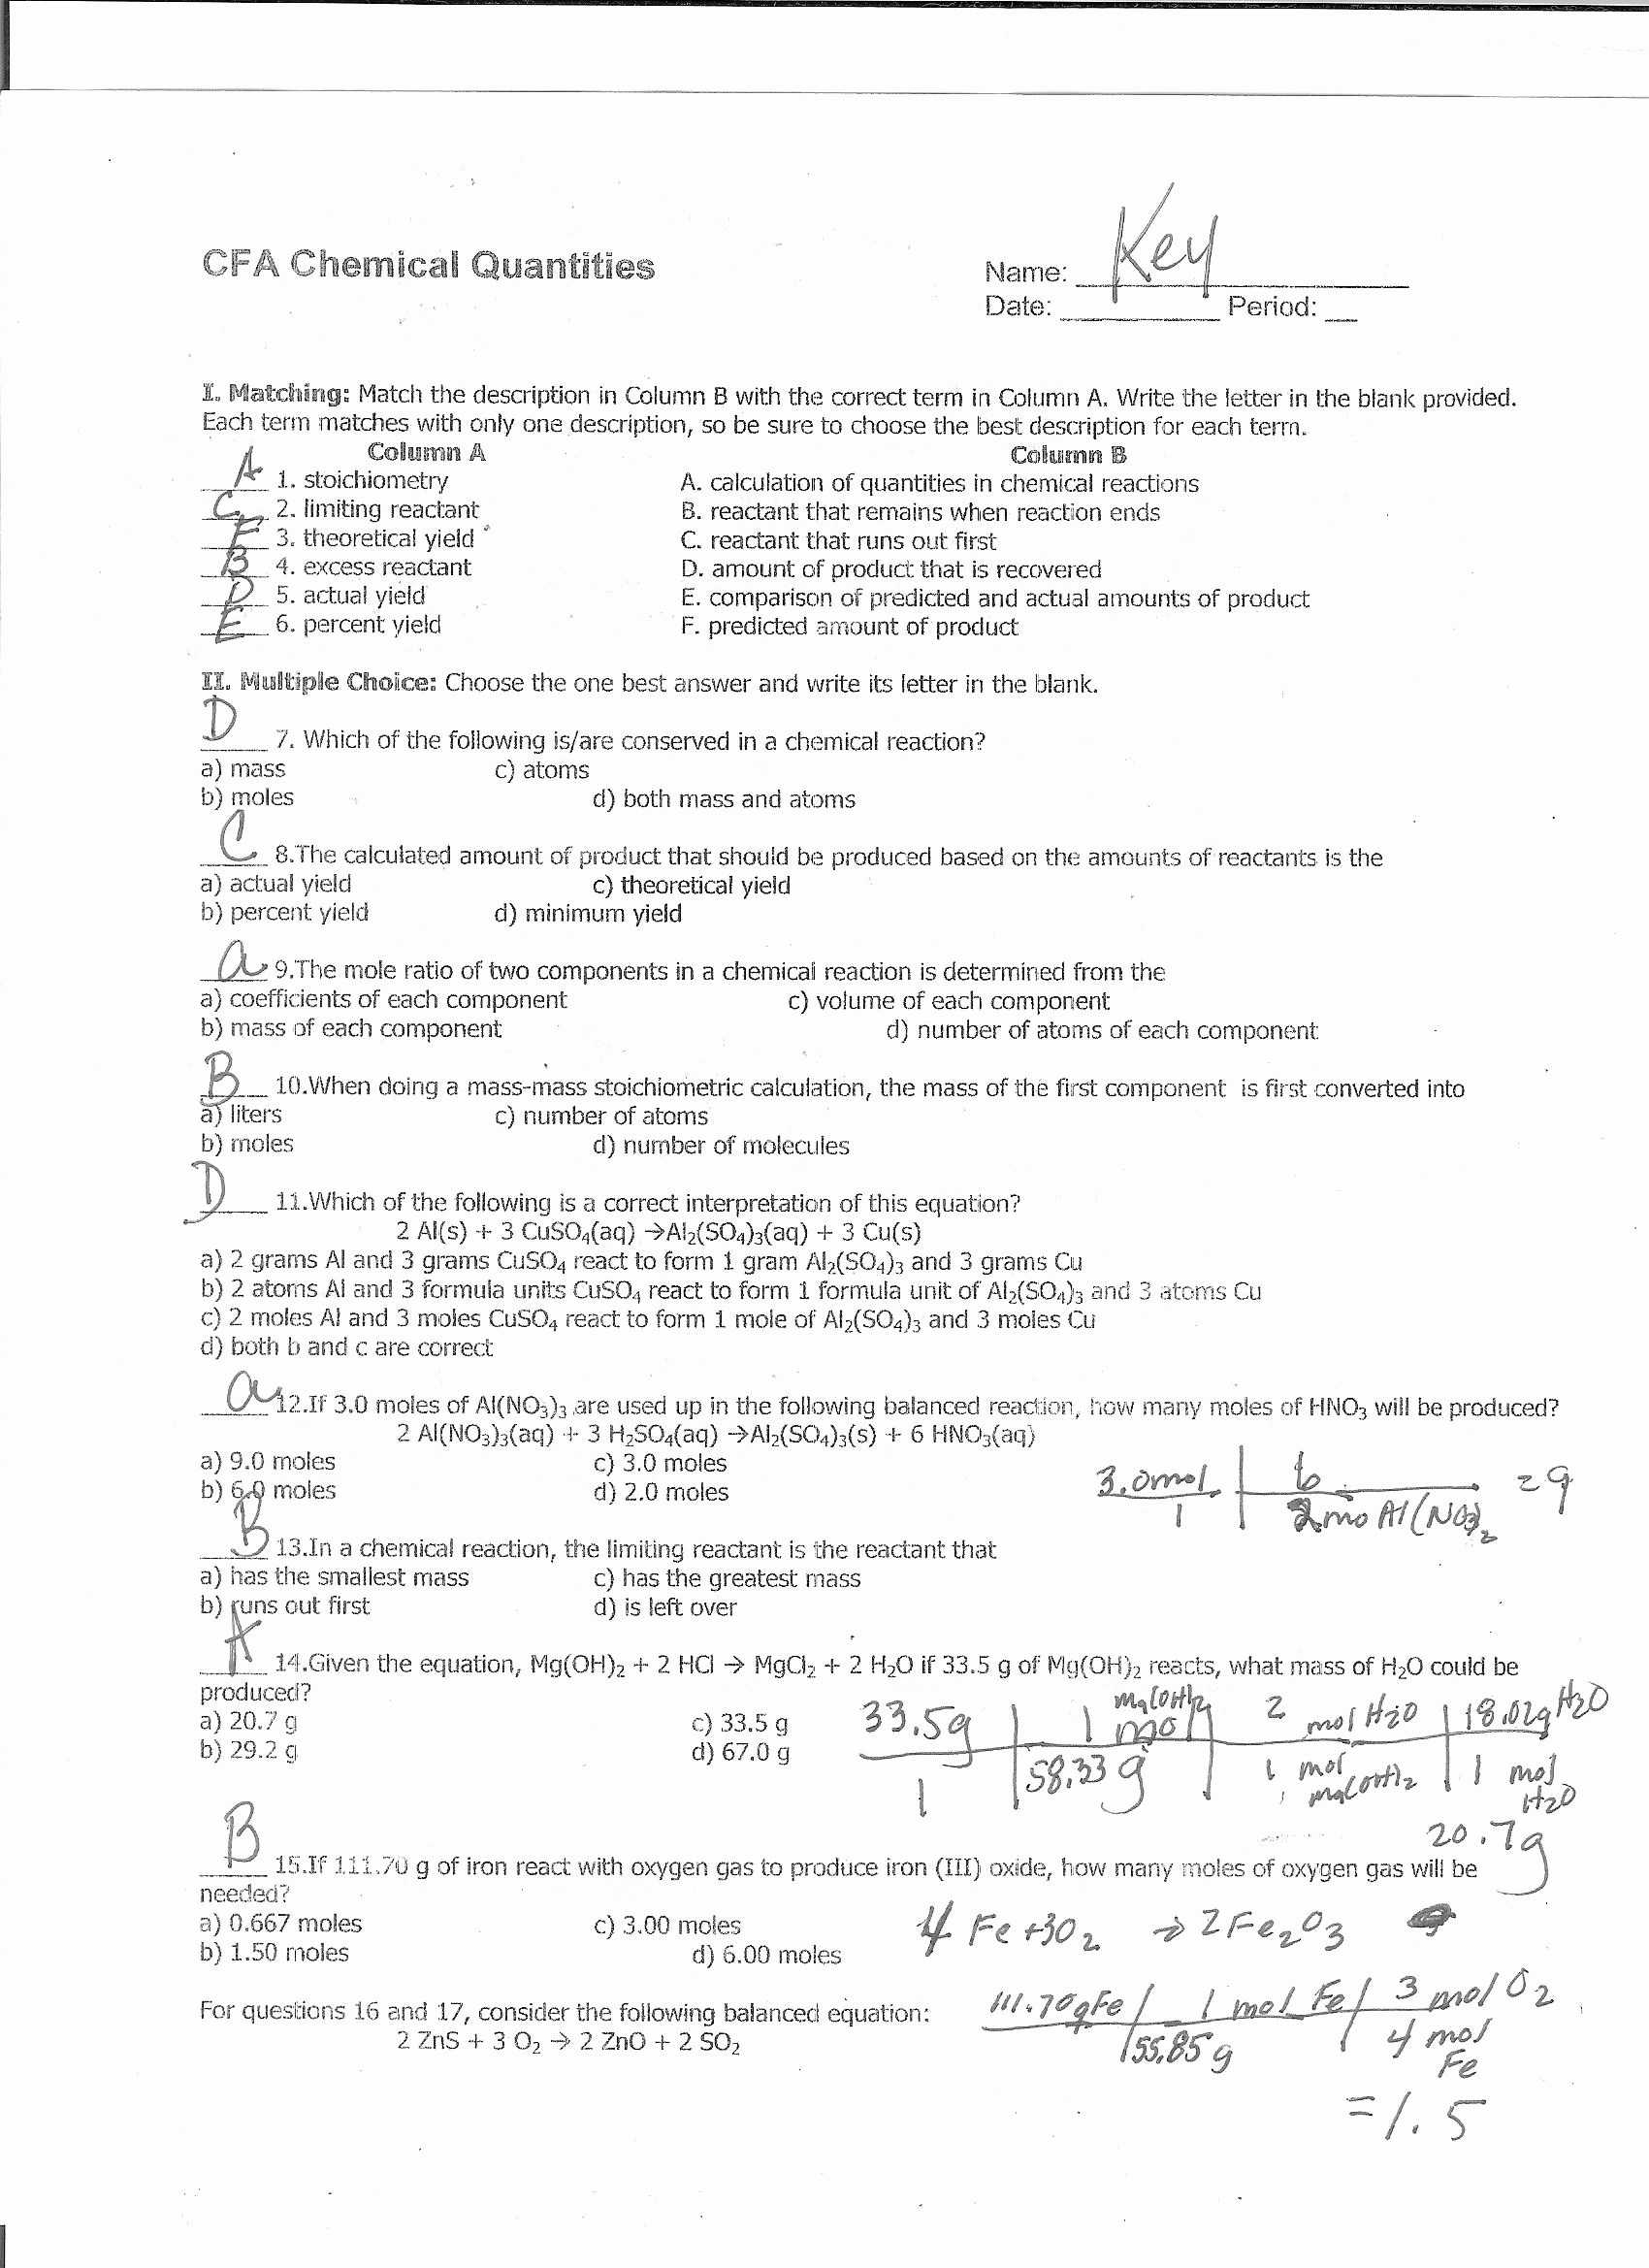 Honors Chemistry Worksheet and Mass to Mass Stoichiometry Problems Worksheet Image Collections